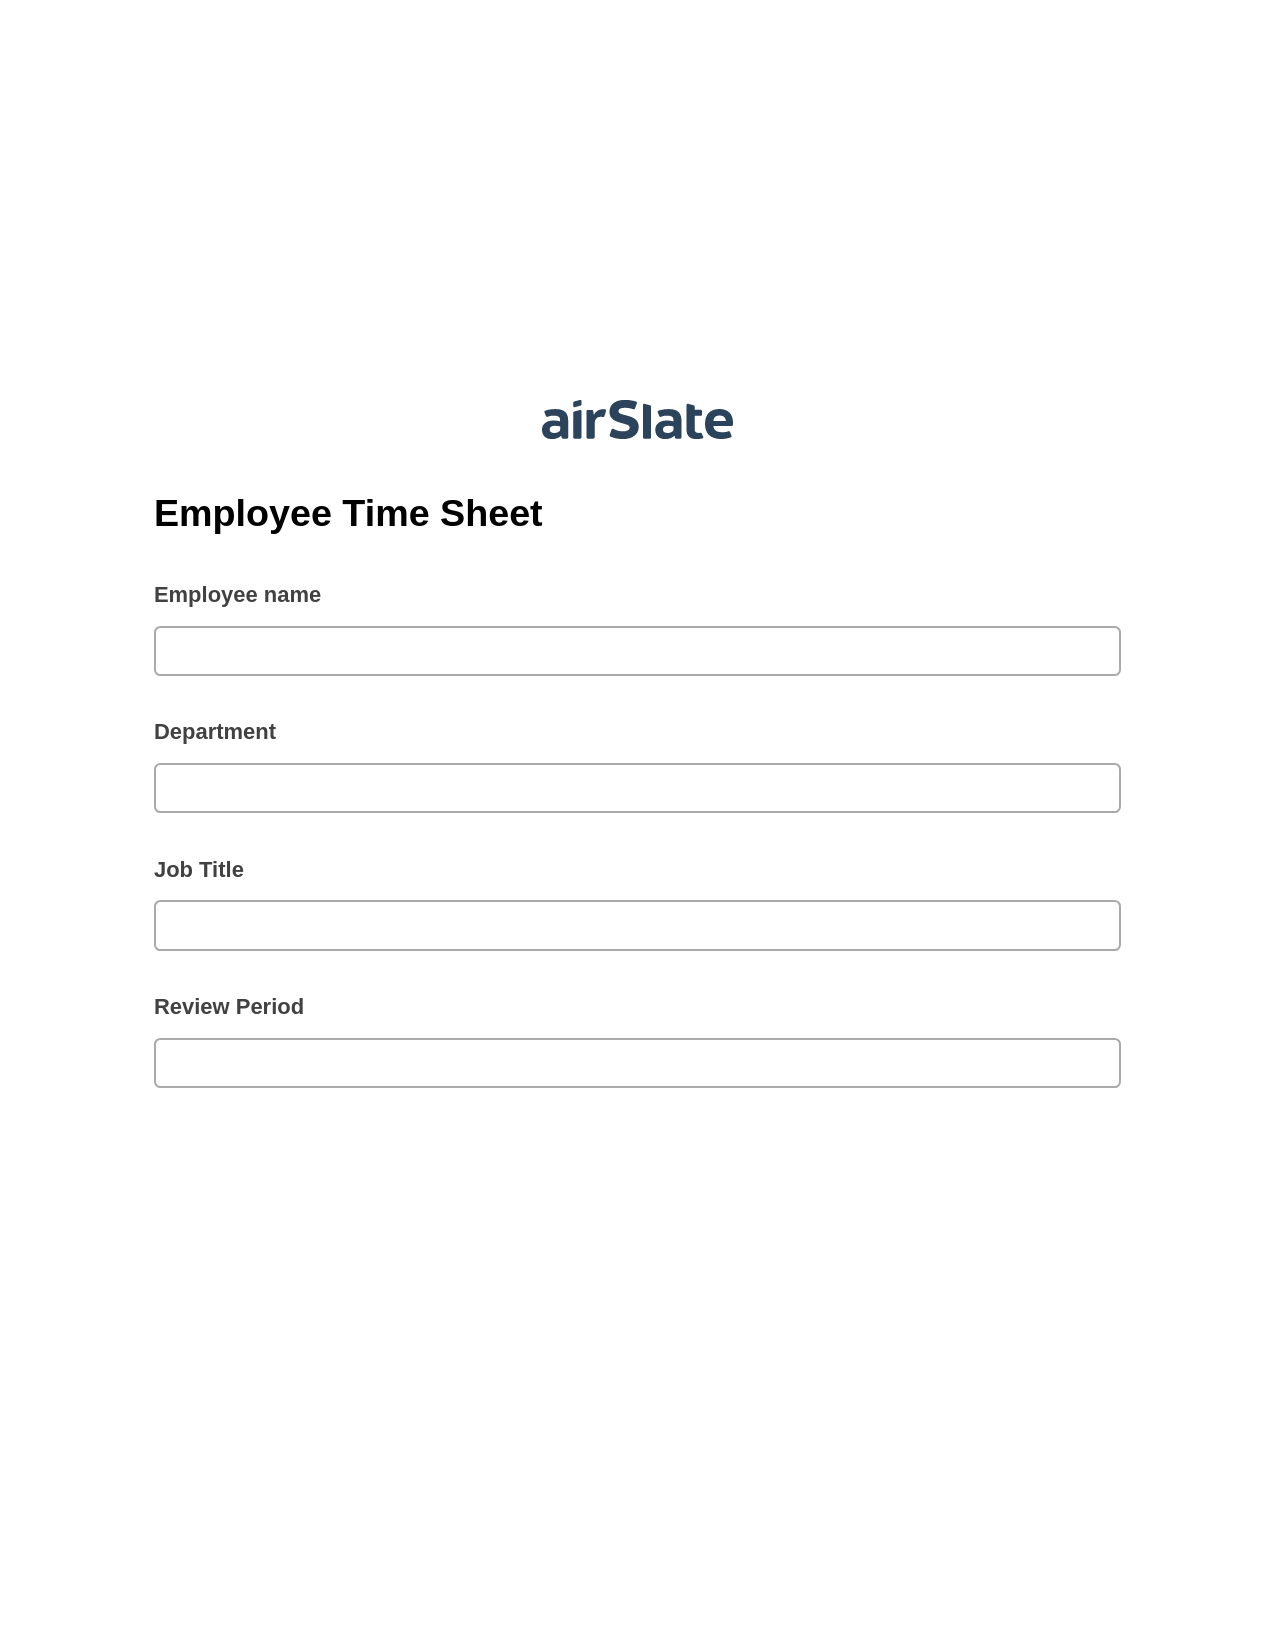 Employee Time Sheet Pre-fill Dropdowns from MySQL Bot, Update Audit Trail Bot, Export to Excel 365 Bot